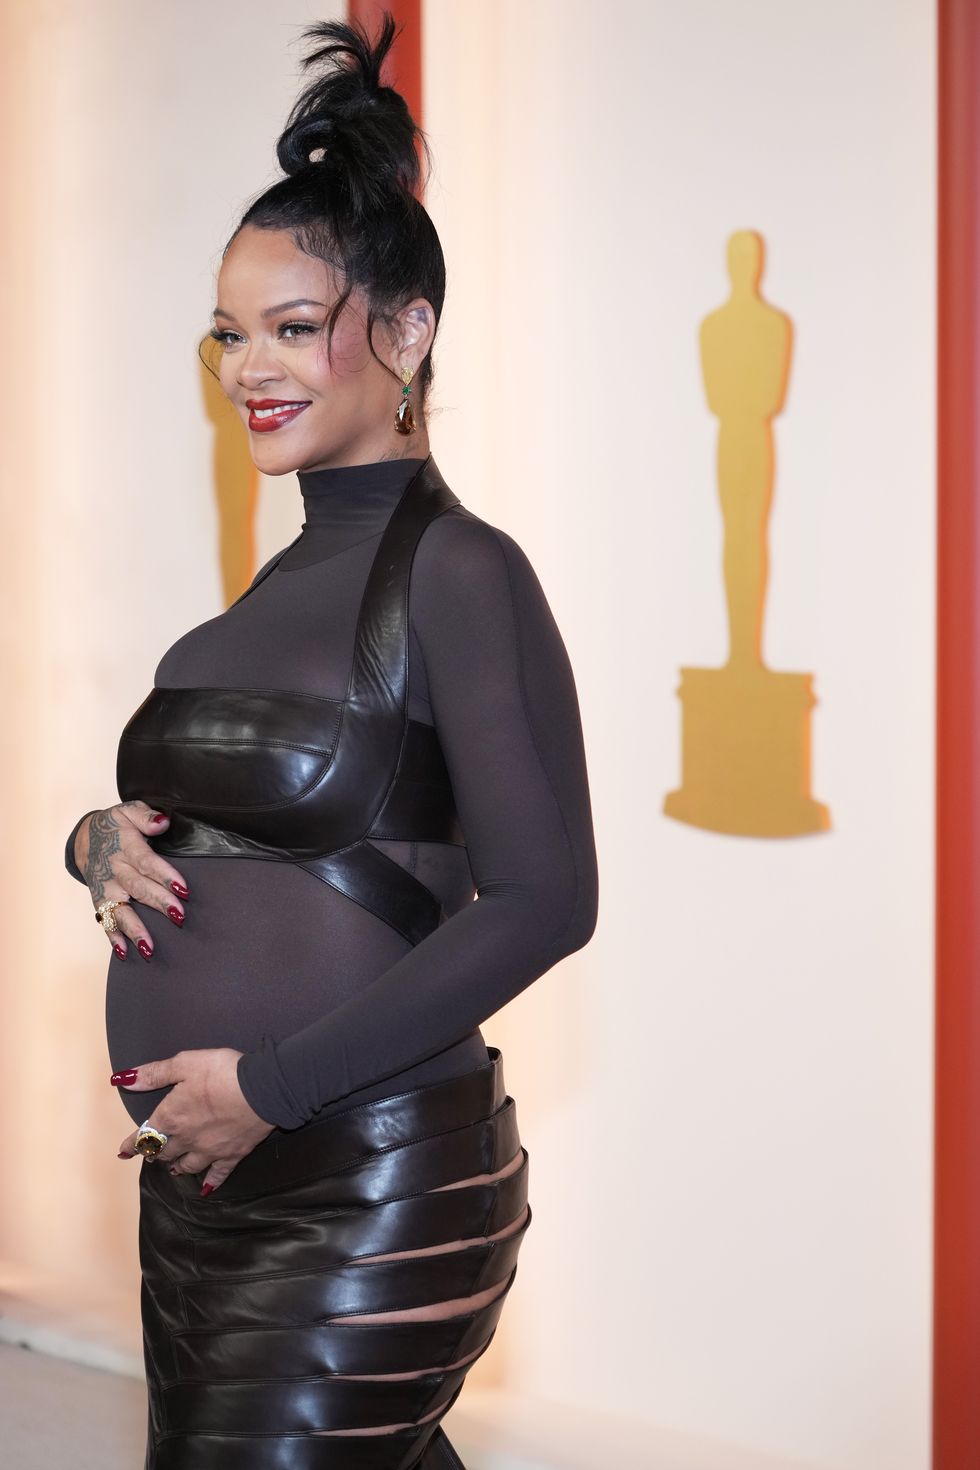 hollywood, california march 12 rihanna attends the 95th annual academy awards on march 12, 2023 in hollywood, california photo by kevin mazurgetty images